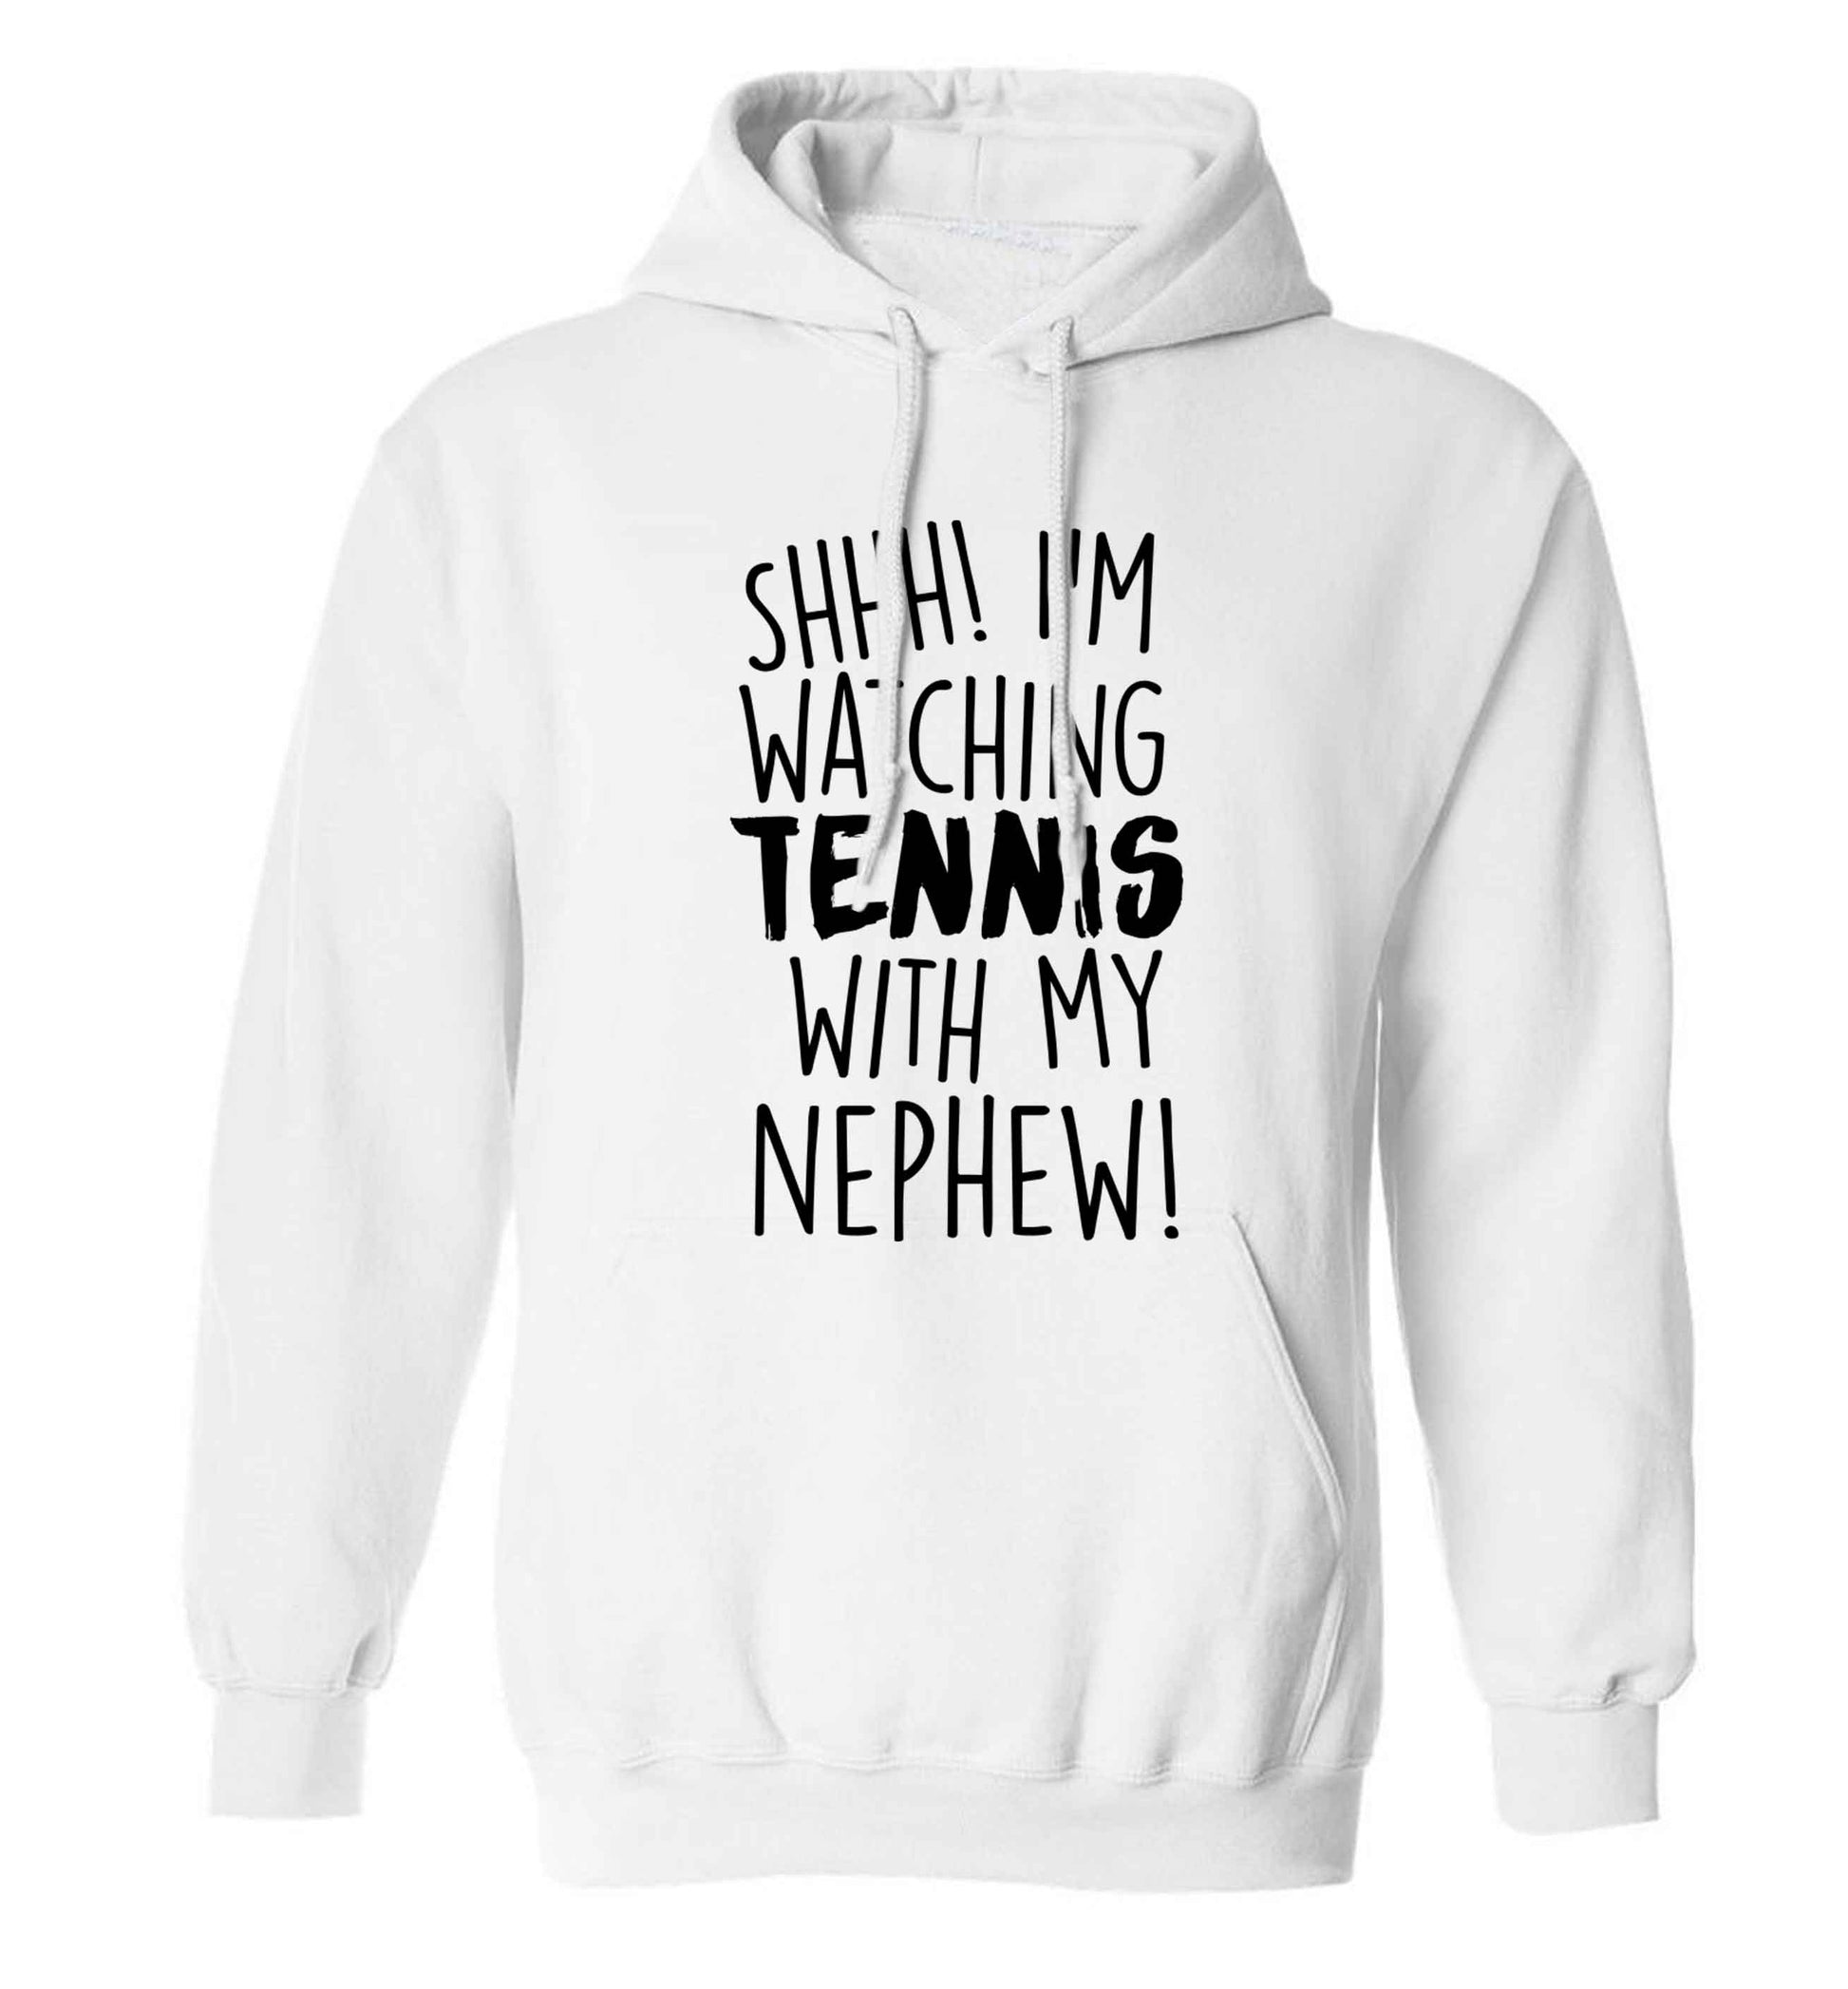 Shh! I'm watching tennis with my nephew! adults unisex white hoodie 2XL